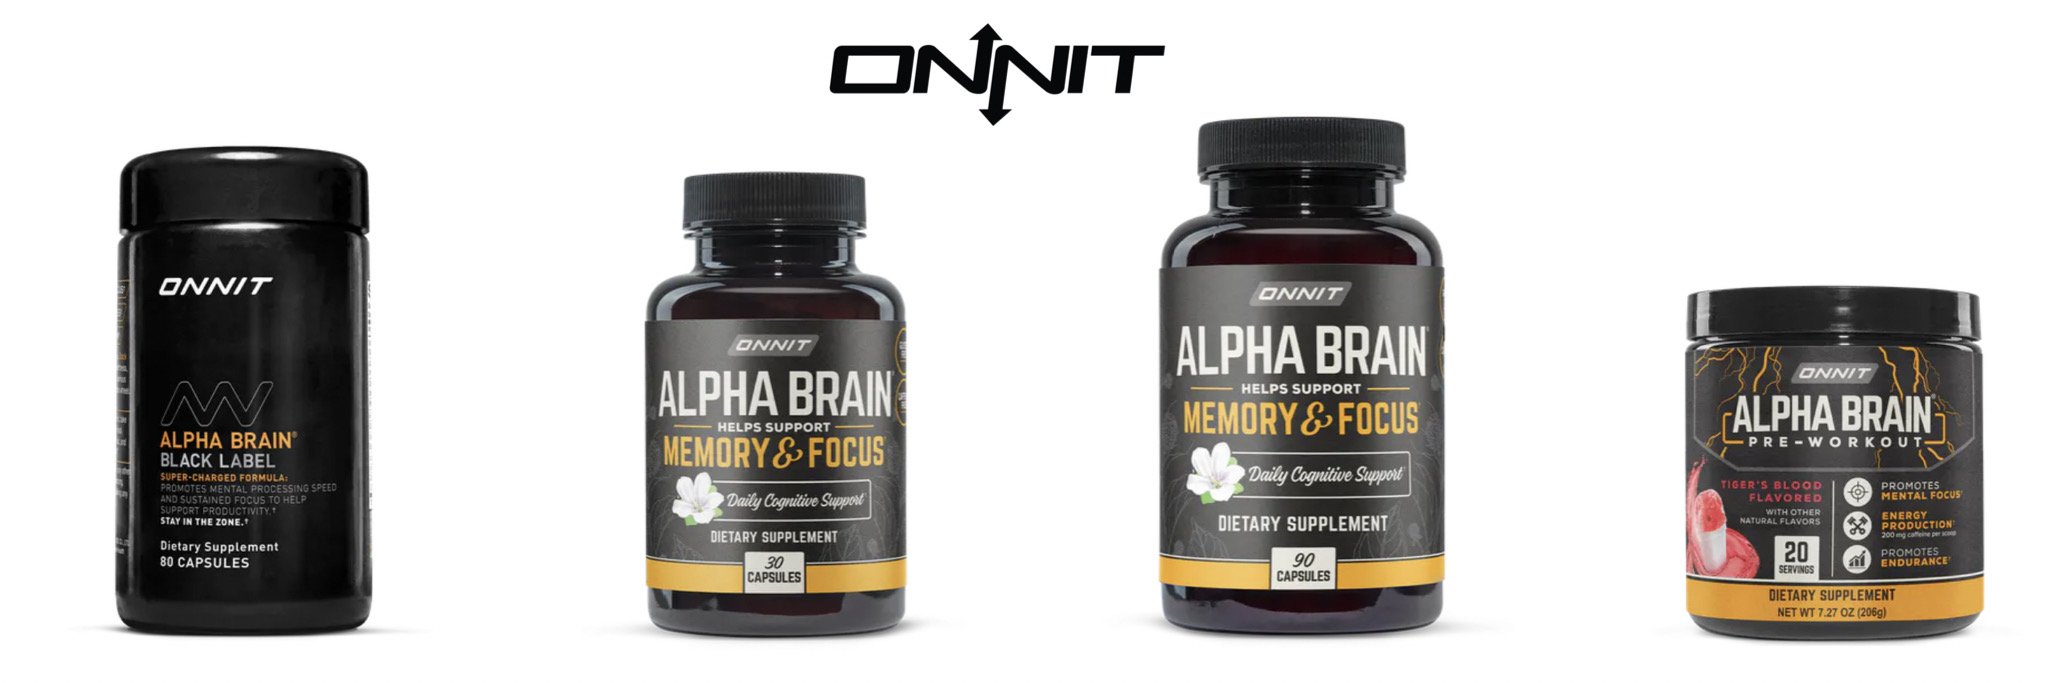     www.ONNIT.com       Mountain Side listeners use Discount code&nbsp;     TMS     &nbsp;to receive&nbsp;     10% off     &nbsp;ONNIT products!&nbsp;   